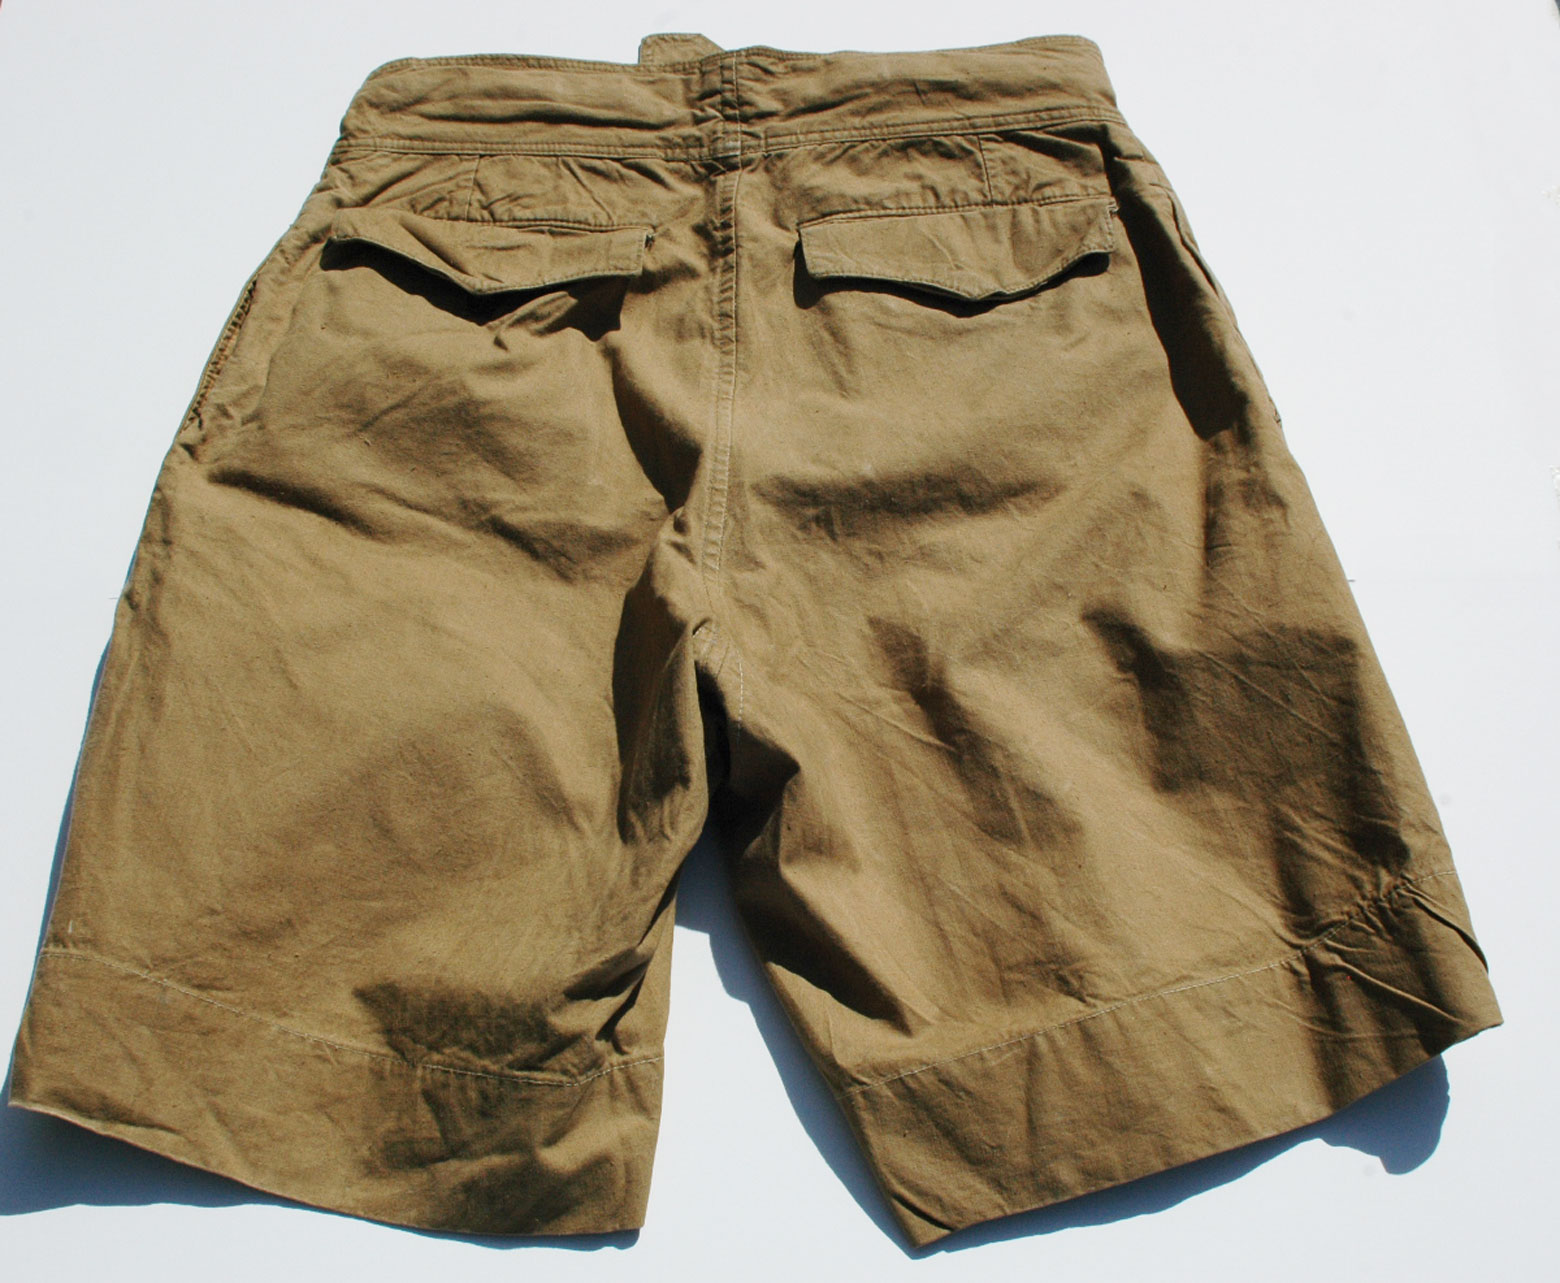 German WWII Luftwaffe Afrika Korps Shorts - Relics of the Reich